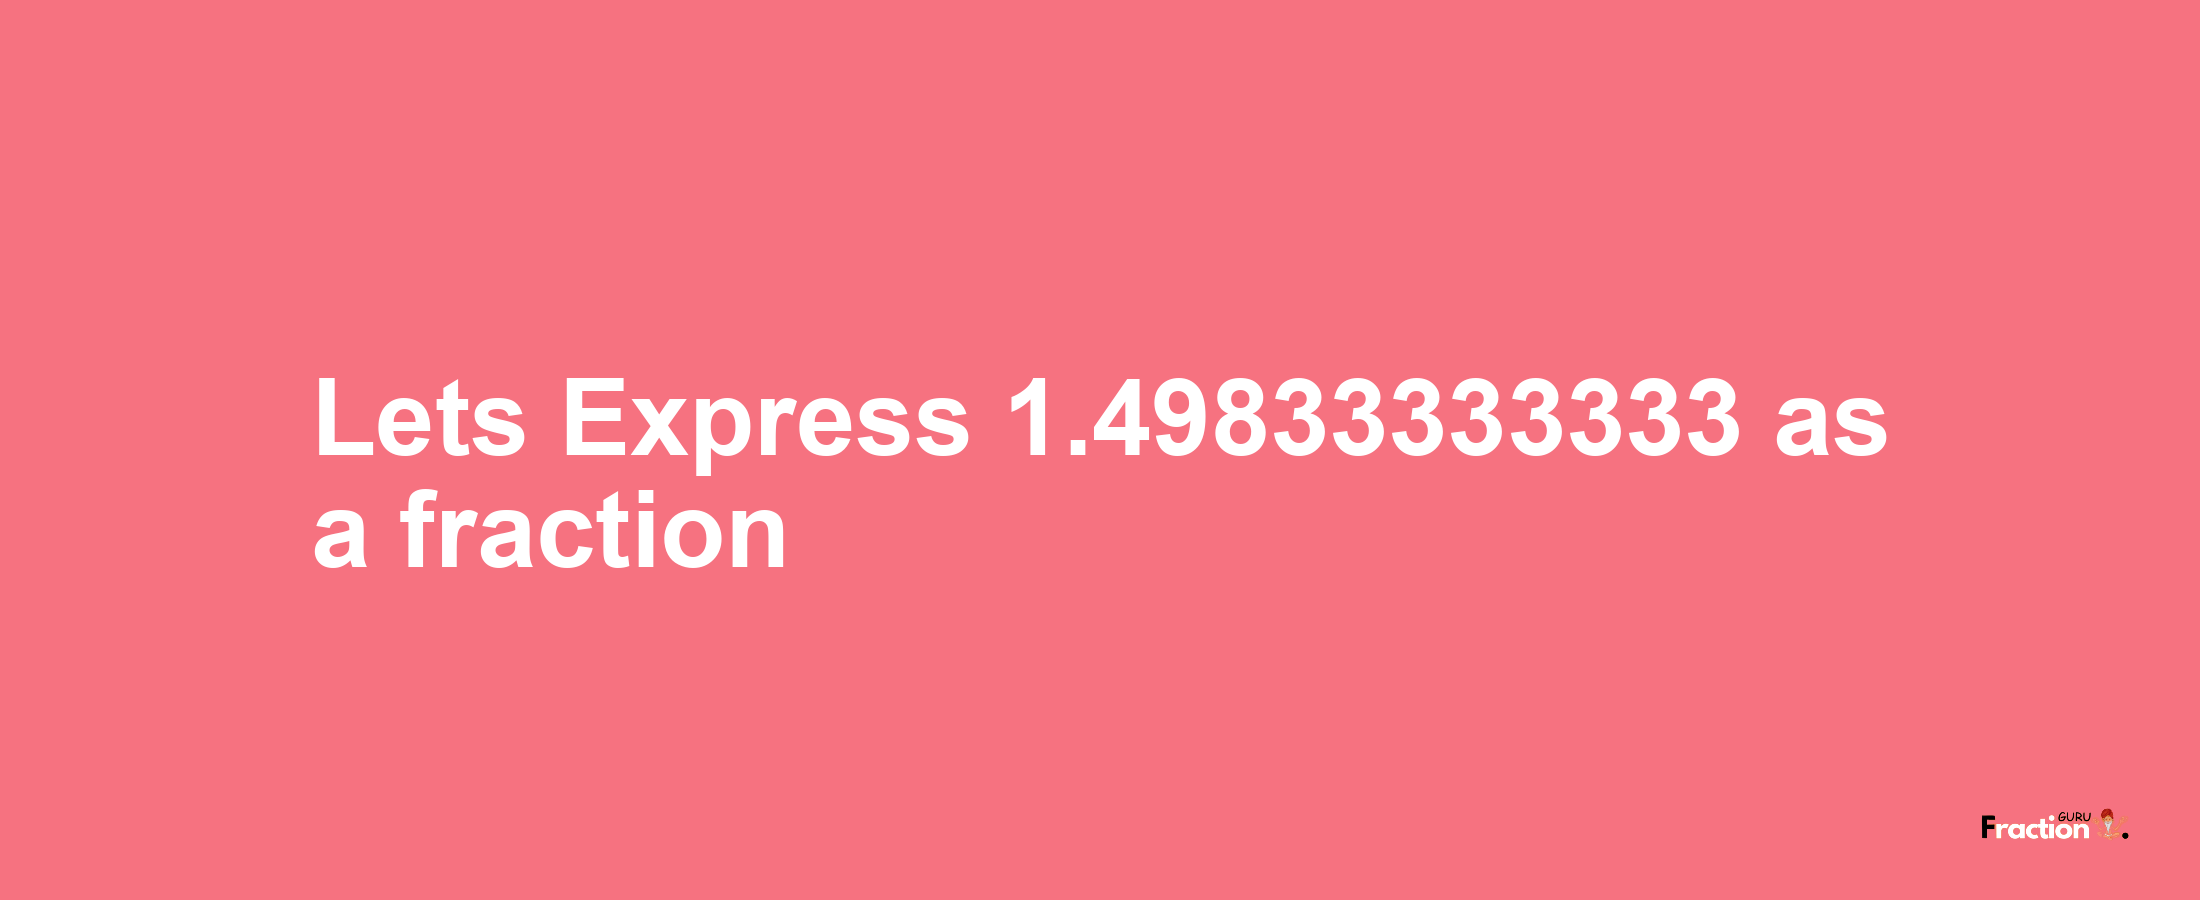 Lets Express 1.49833333333 as afraction